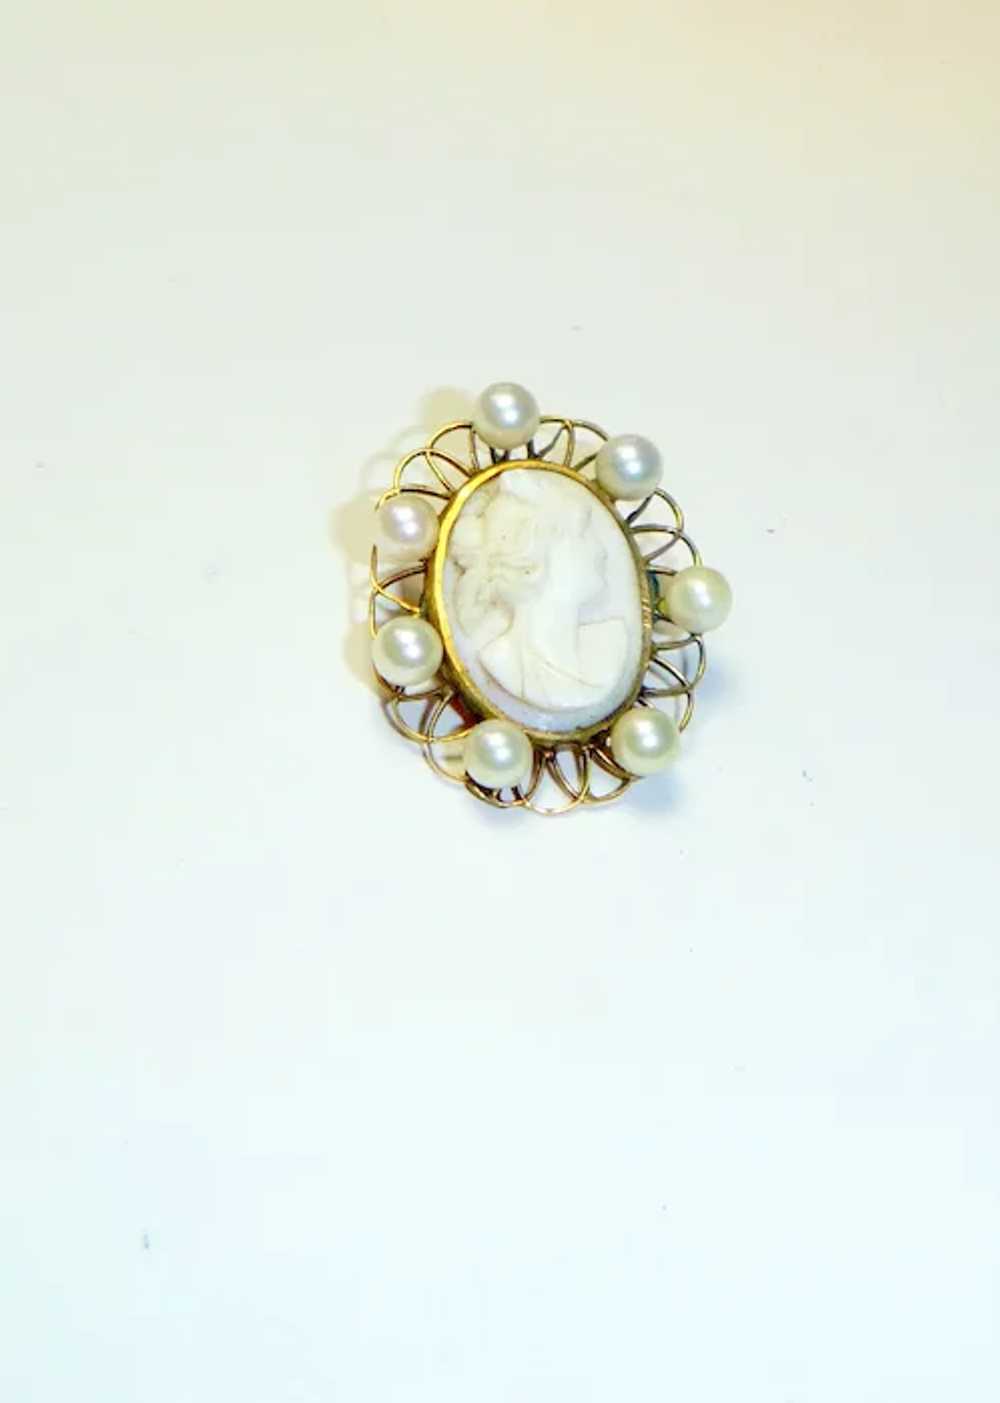 Vintage Conch Shell & Cultured Pearl Cameo Brooch - image 3